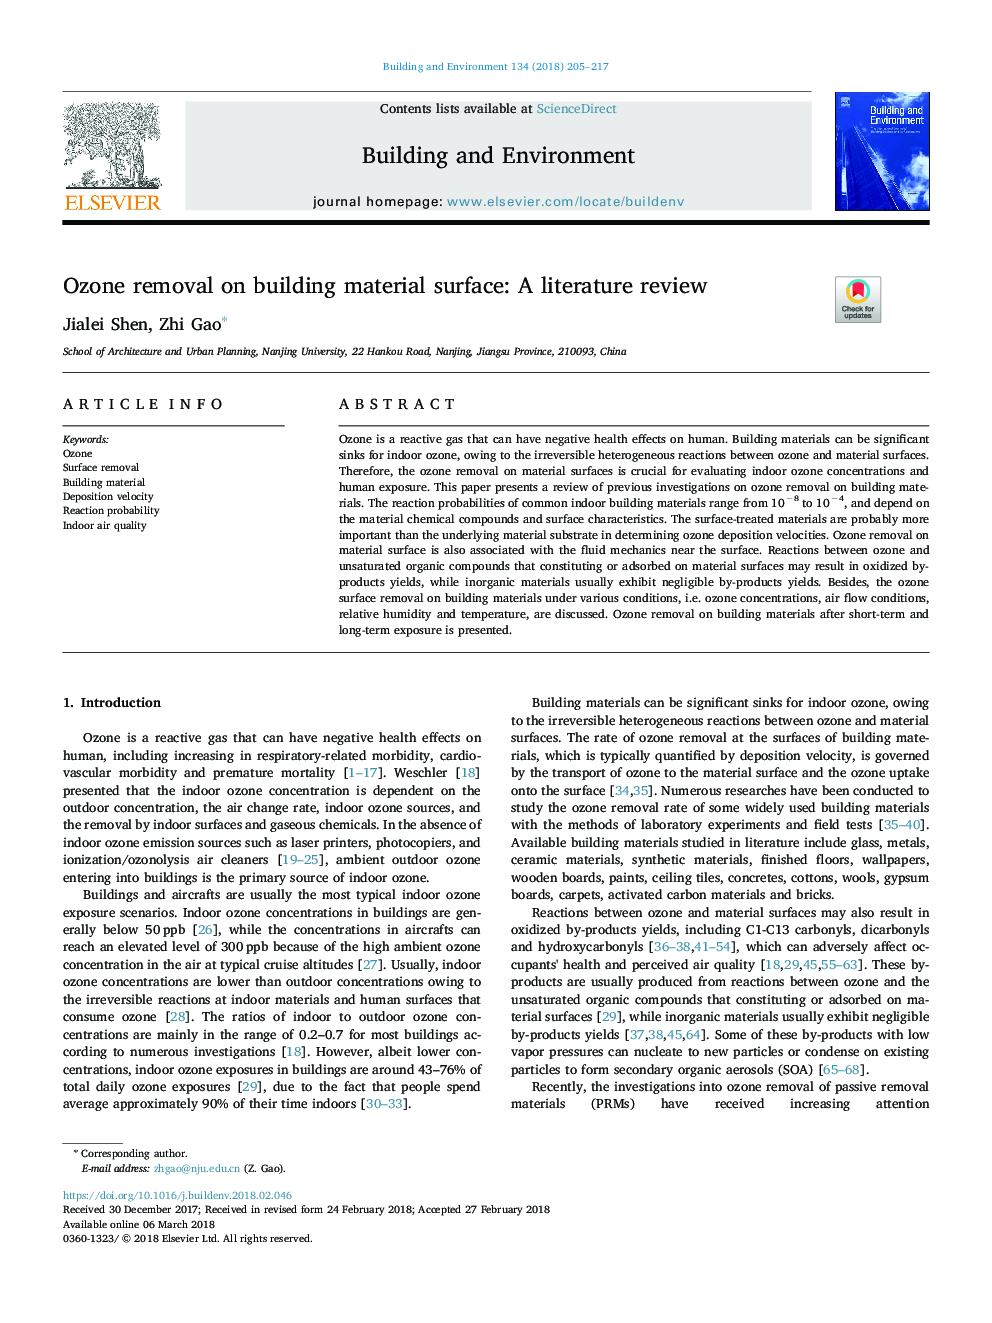 Ozone removal on building material surface: A literature review